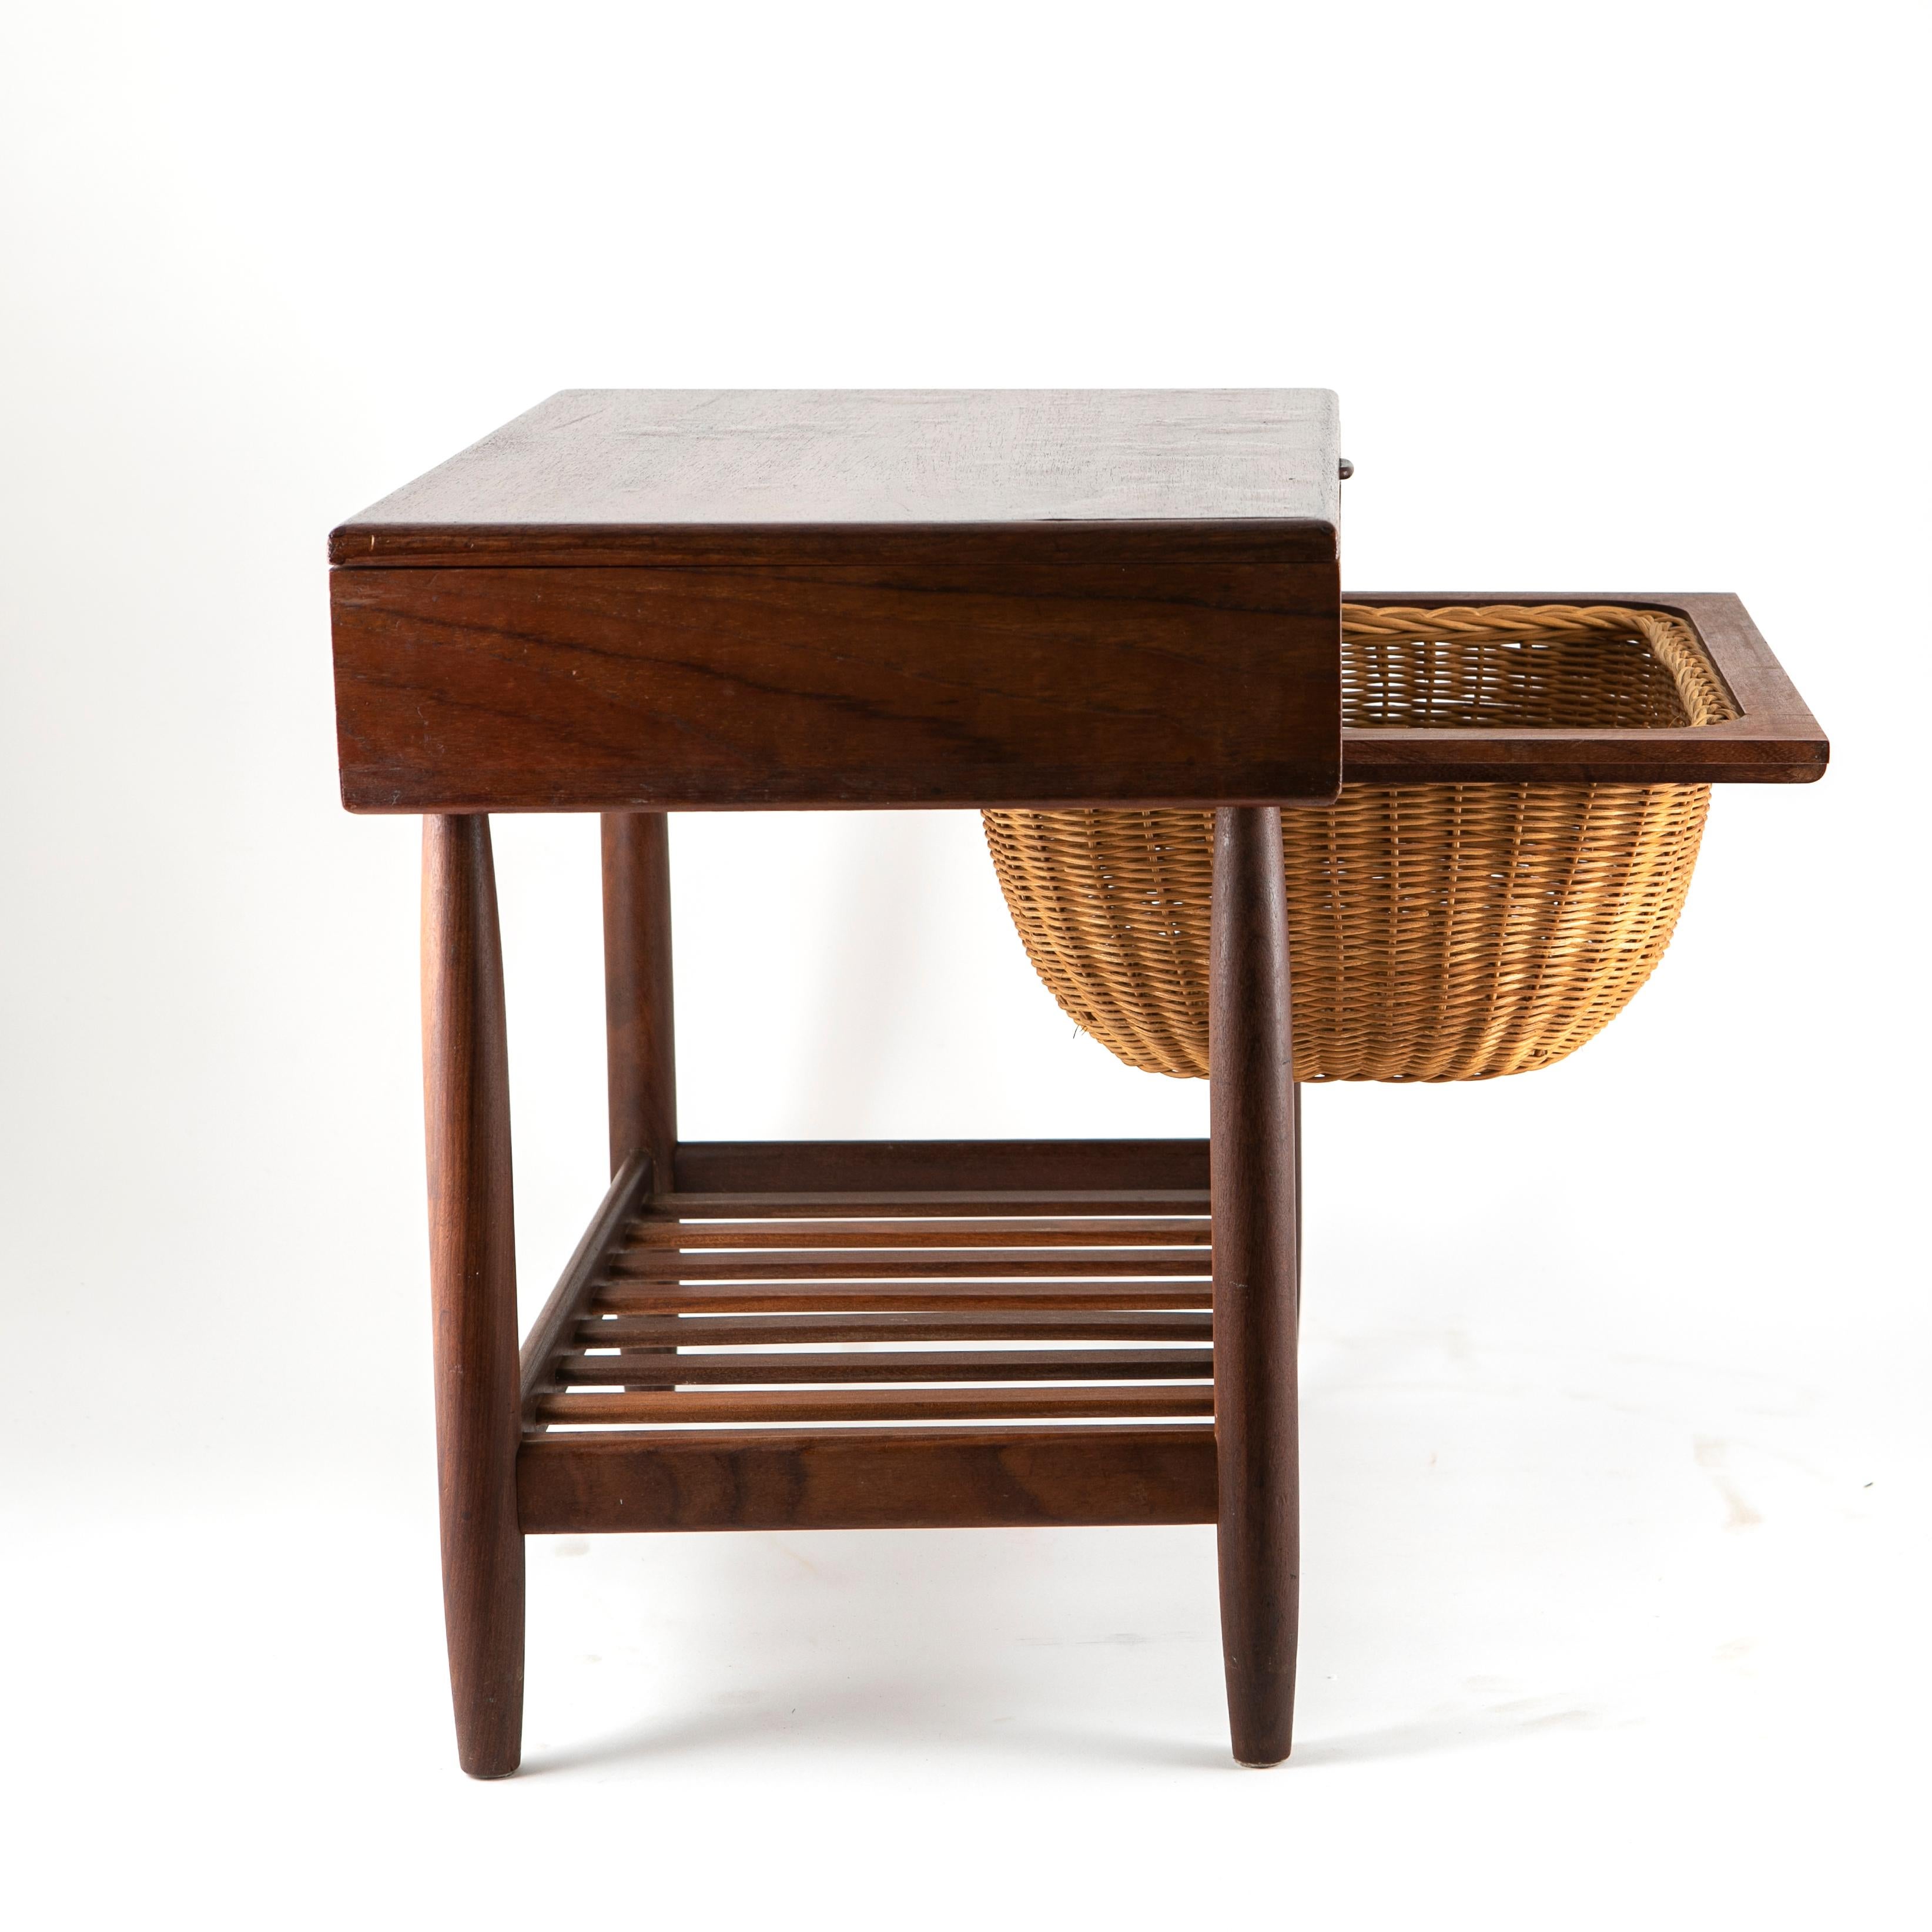 Wicker Danish Modern Sewing / End Table by Ejvind Johansson for FDB Mobler